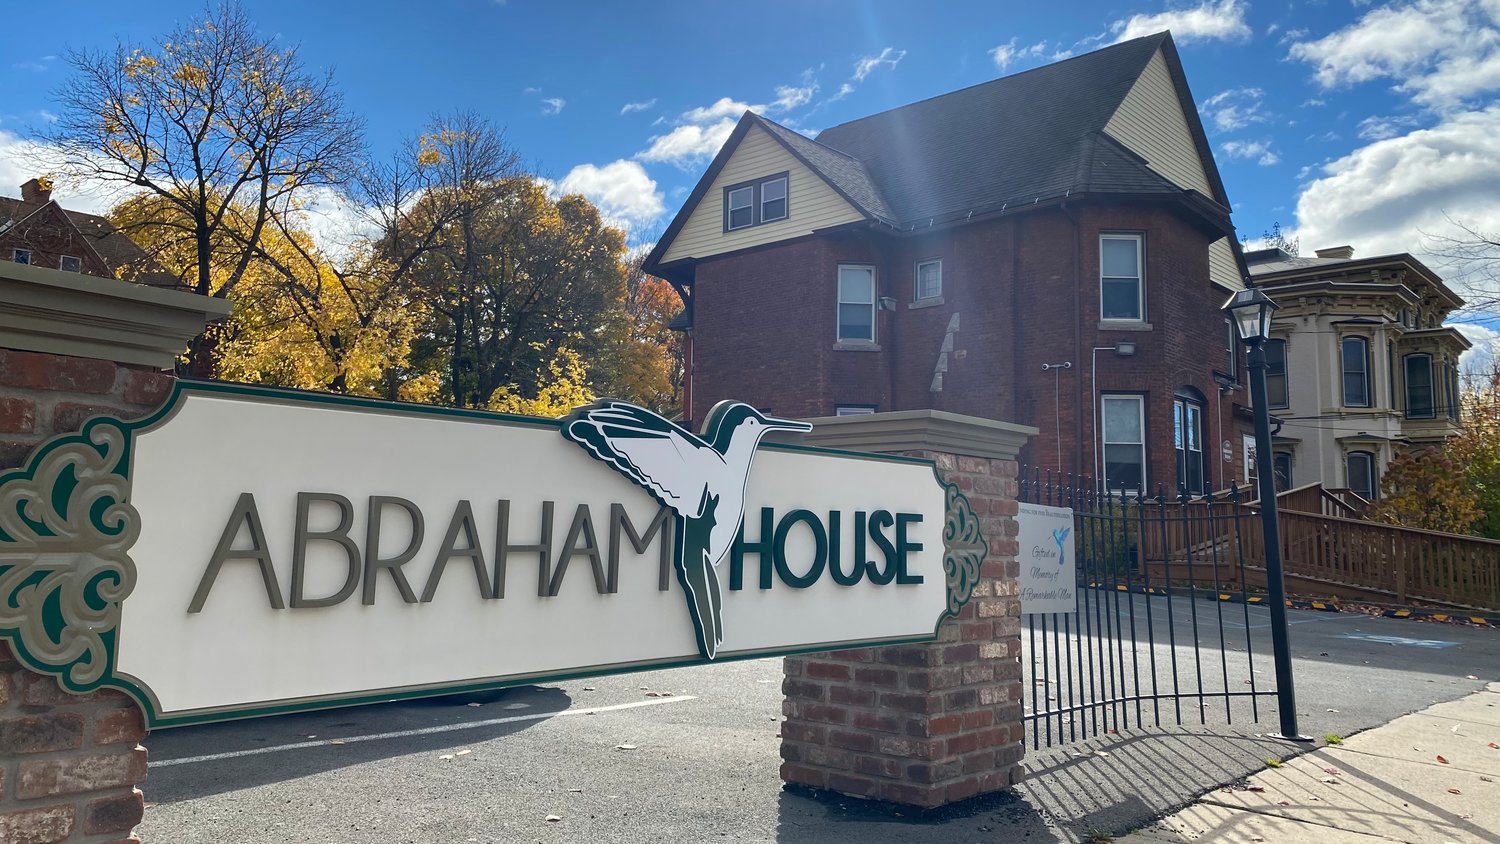 The Abraham House, with locations in both Utica and Rome, will be celebrating their final ‘A View of Hope’ Gala on Friday, Nov. 4.